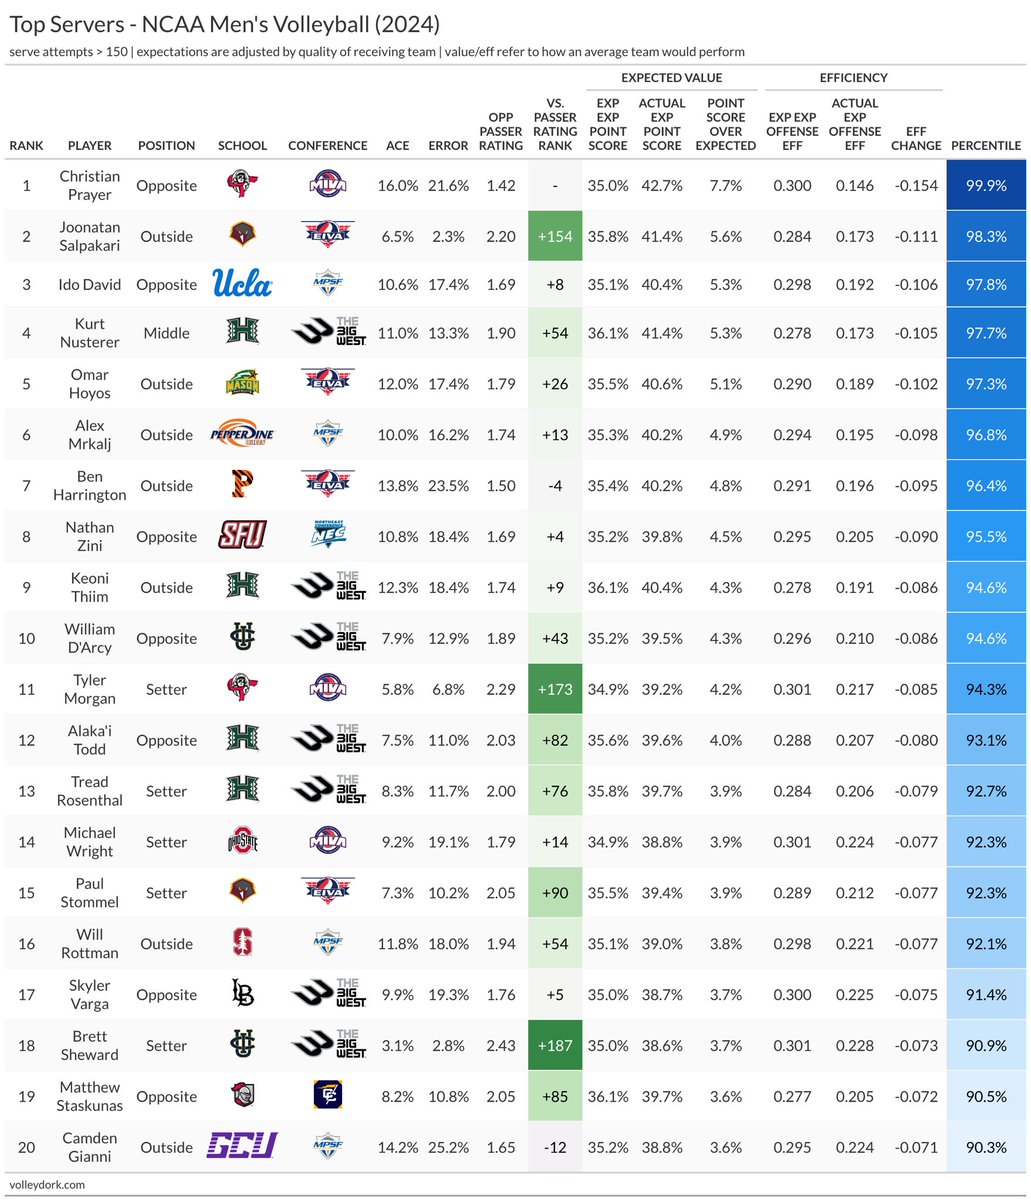 Top Servers in NCAA Men’s Volleyball (2024) Interesting split between high risk and low risk players. Lewis’s Christian Prayer can afford to be high risk because his ace rate is crazy high. Others like the lefty floater Joonatan Salpakari, setter Tyler Morgan, and bearded…